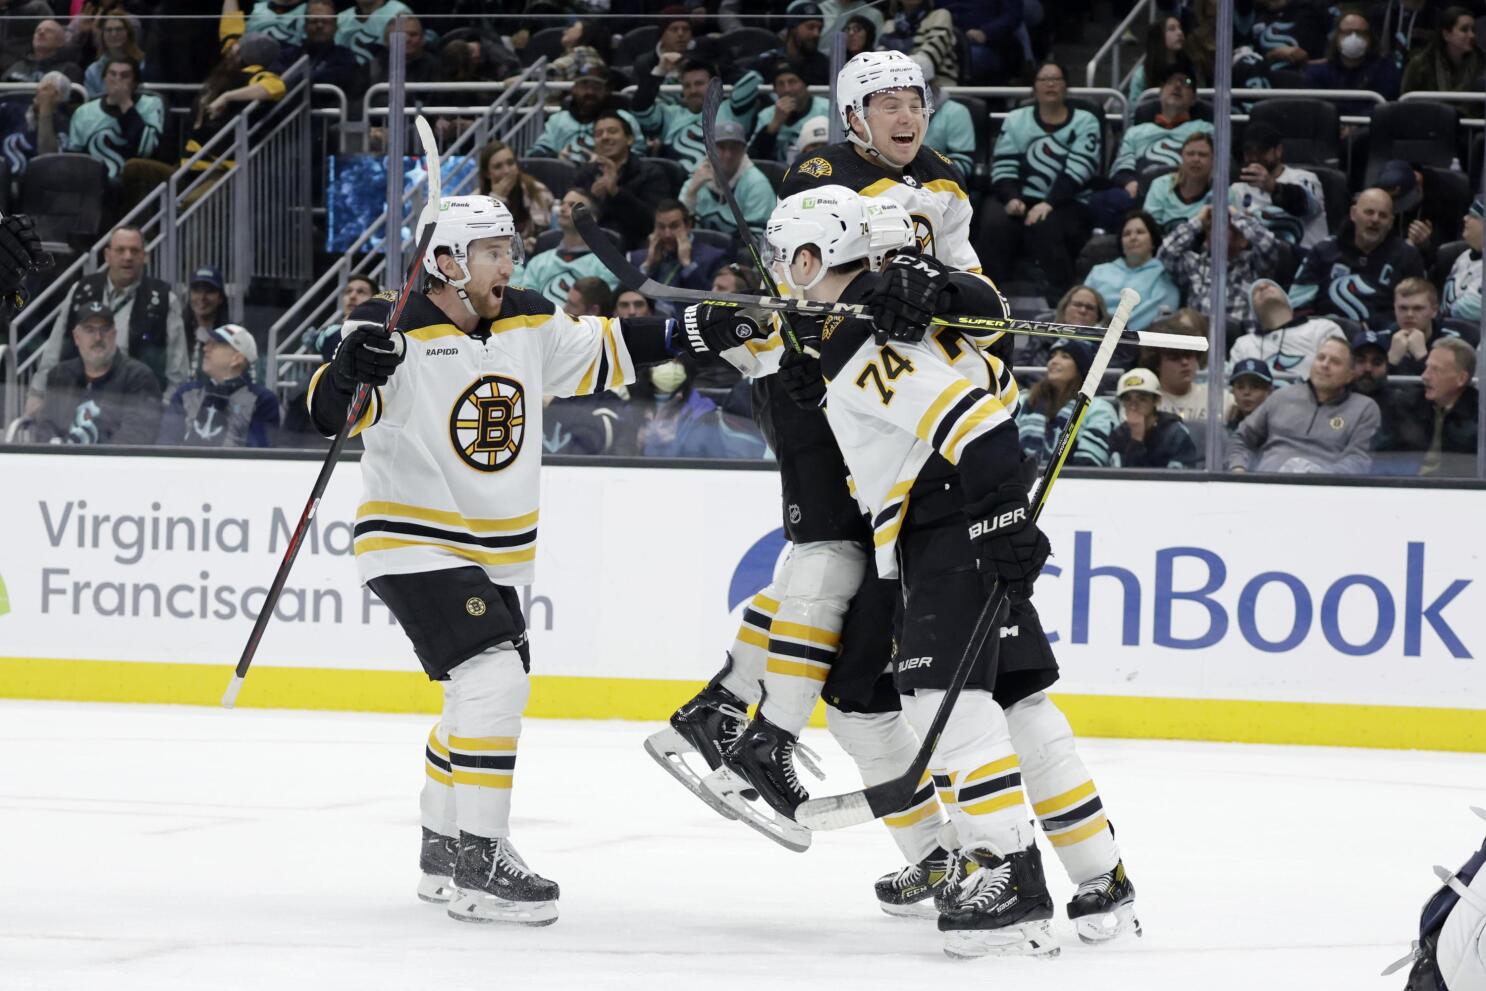 Jake DeBrusk scores two late goals as Bruins edge Penguins in Winter Classic